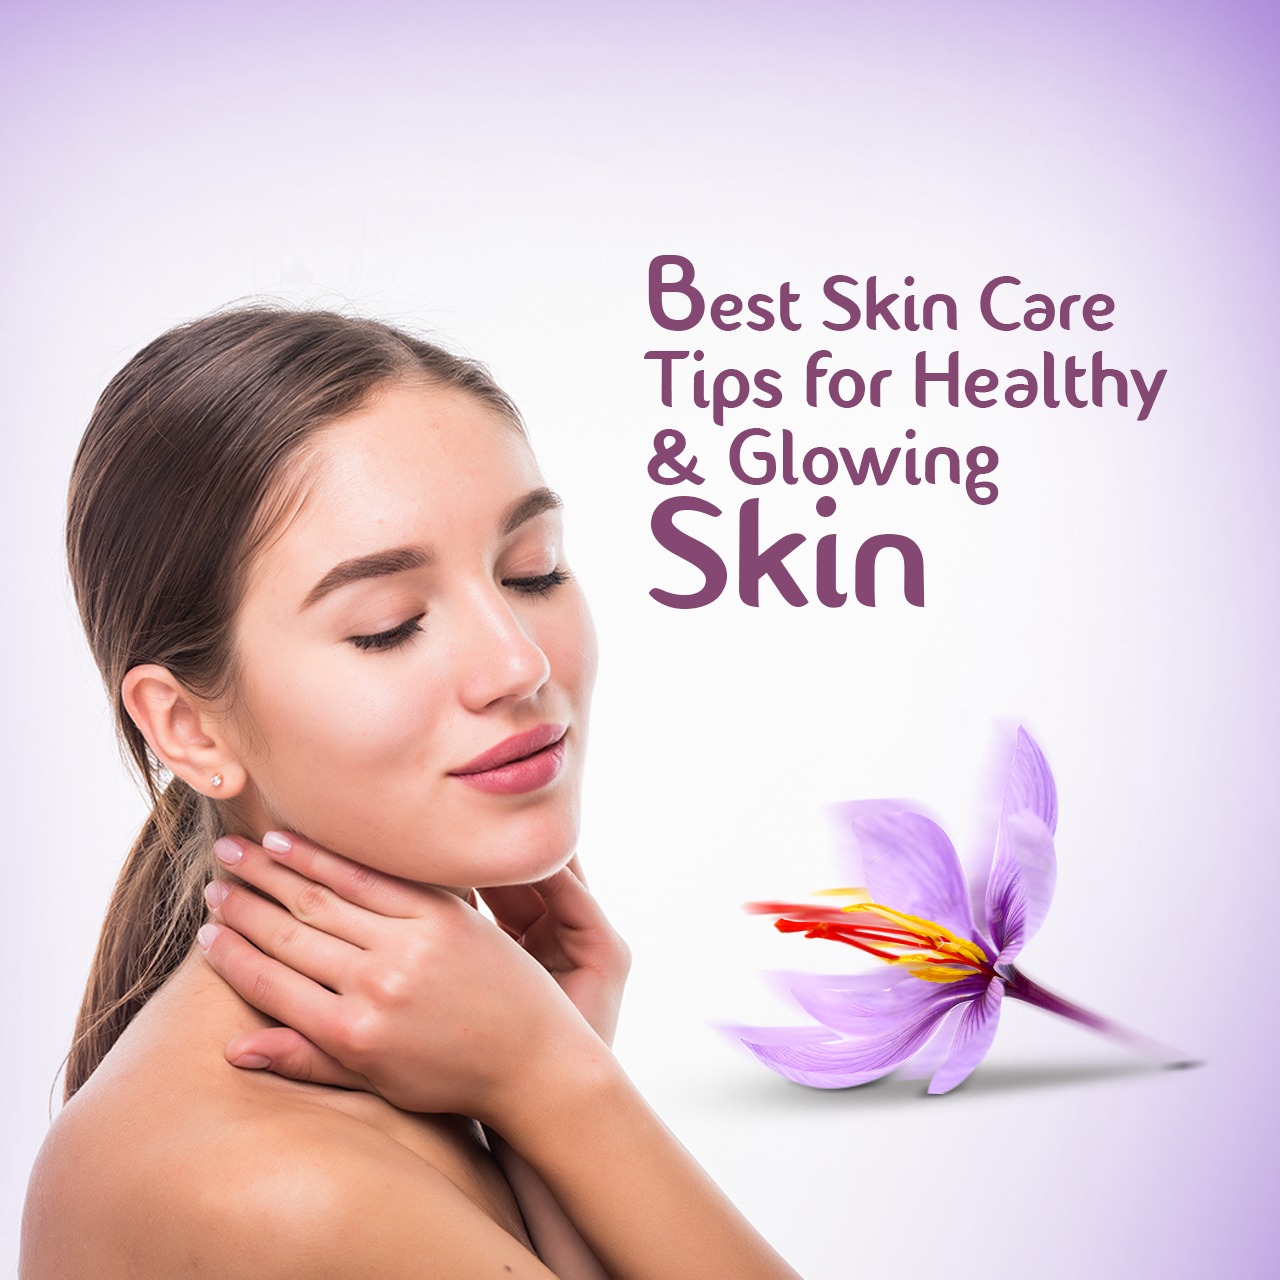 Best Skin Care Tips for Healthy and Glowing Skin